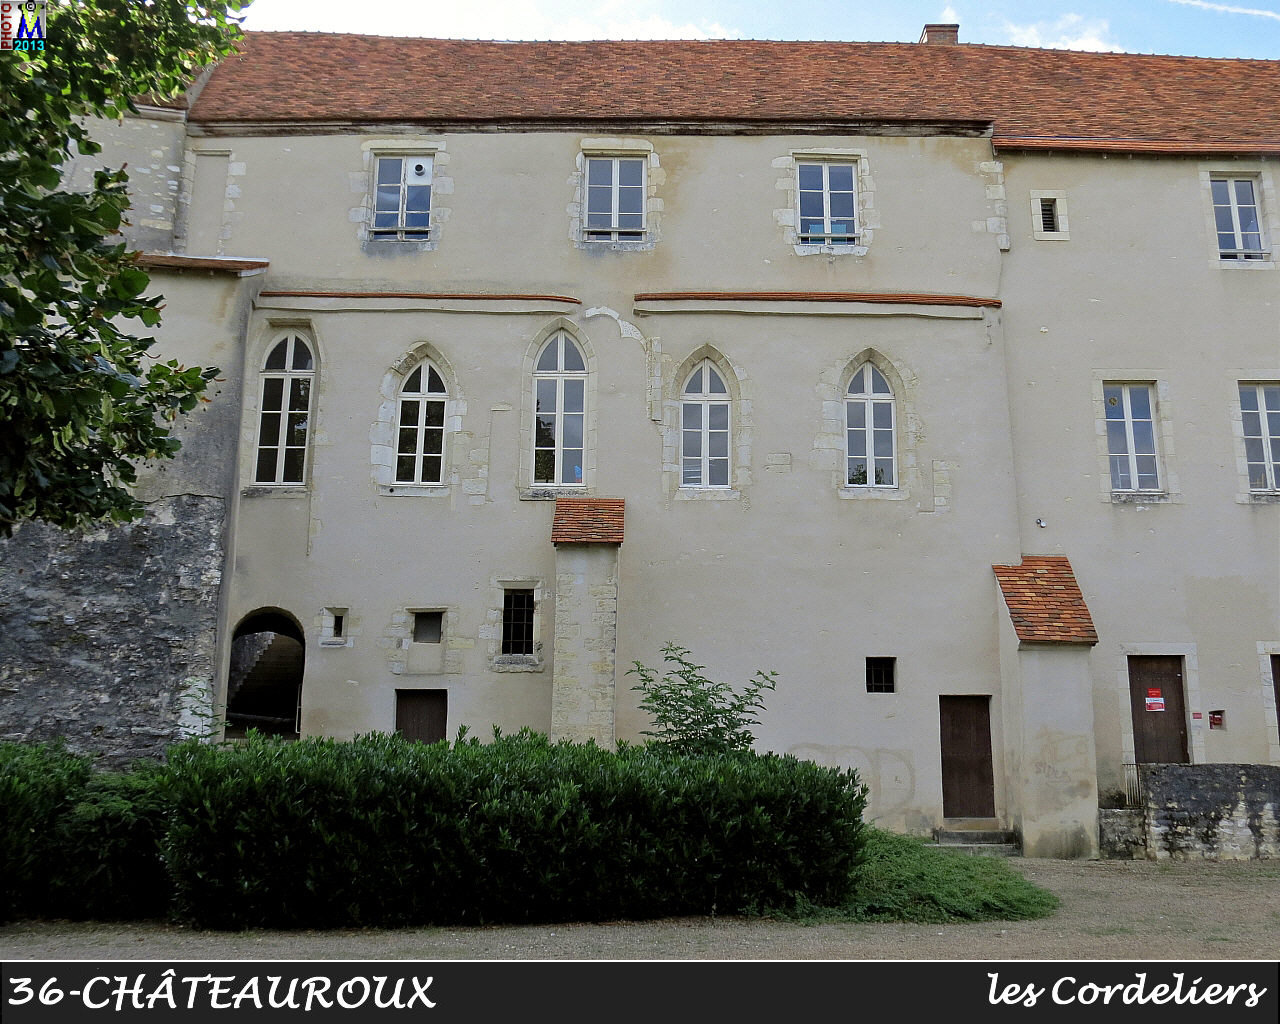 36CHATEAUROUX_cordeliers_112.jpg